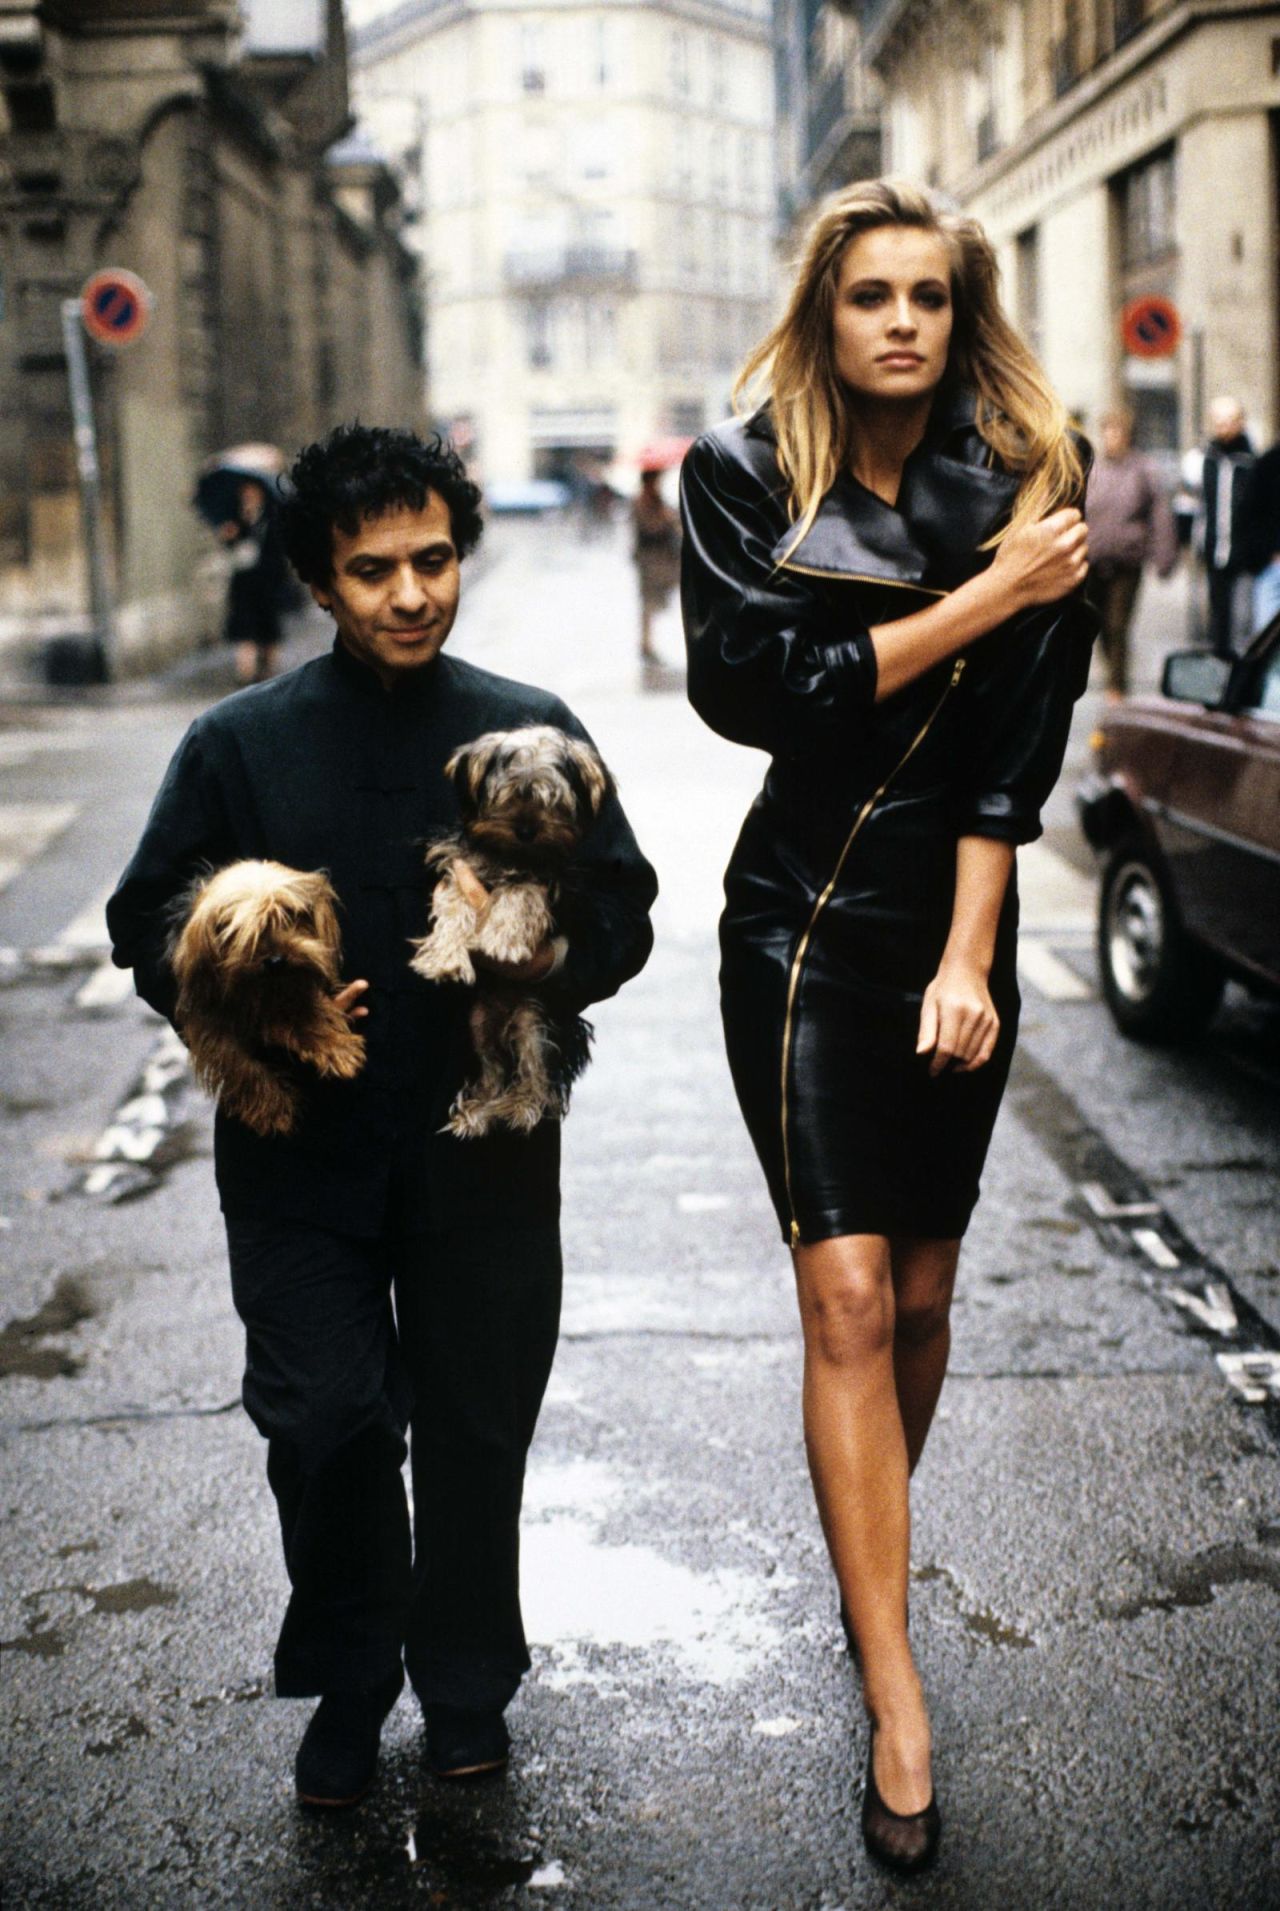 Azzedine Alaïa, holding his Yorkshire terriers, Patapouf and Wabo, walks the streets of Paris with model Frederique, who wears a dress of his design.